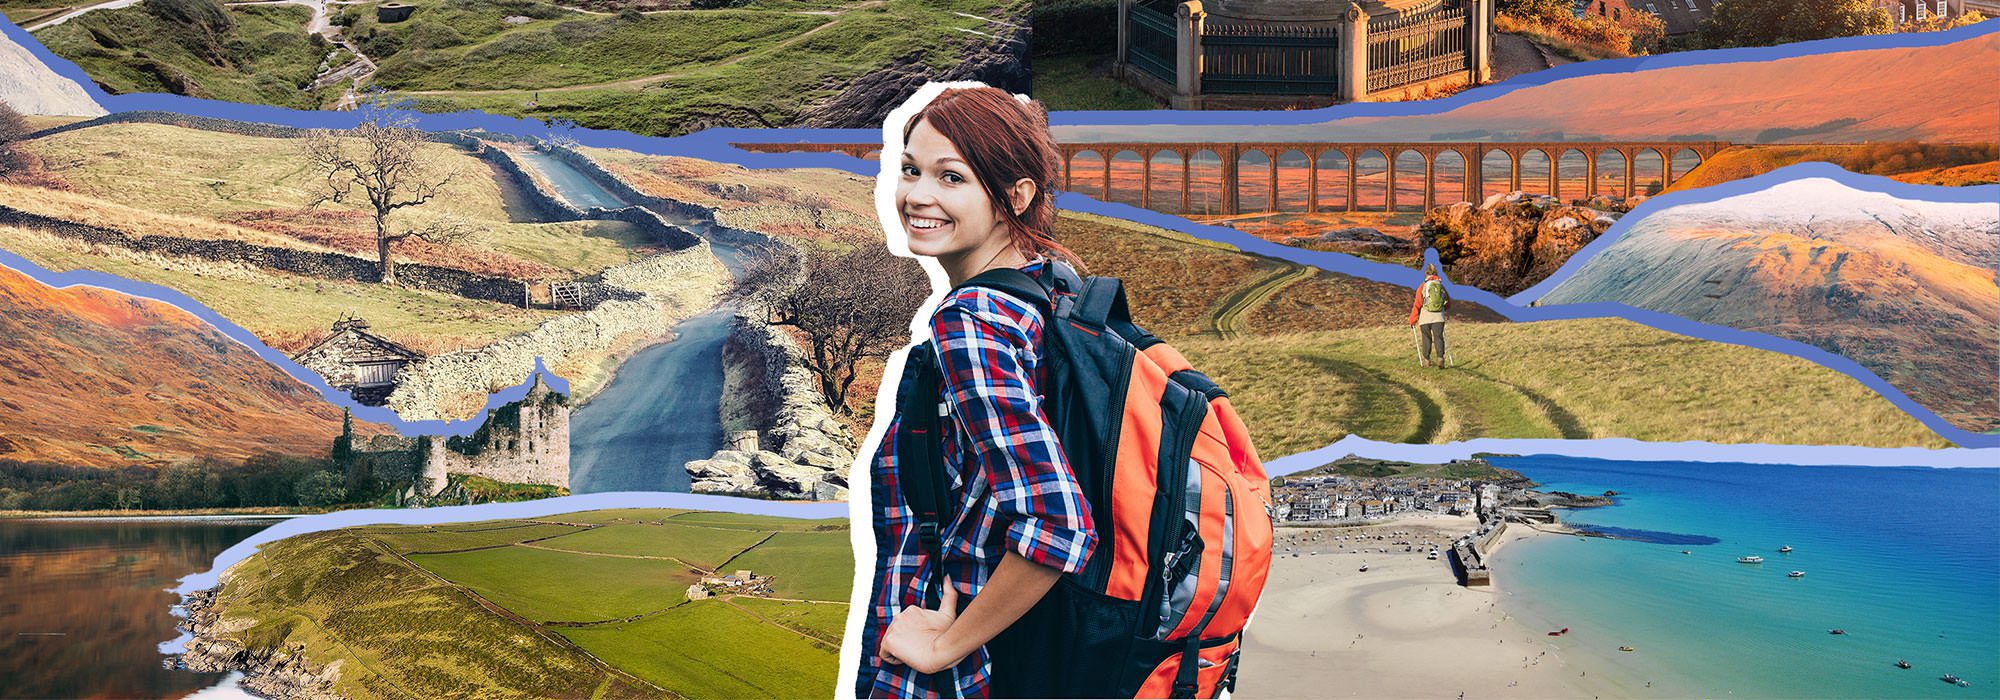 A montages of iconic UK locations with hostels or bunkhouses close by with a friendly smile from a girl with a rucksack inviting you to adventure